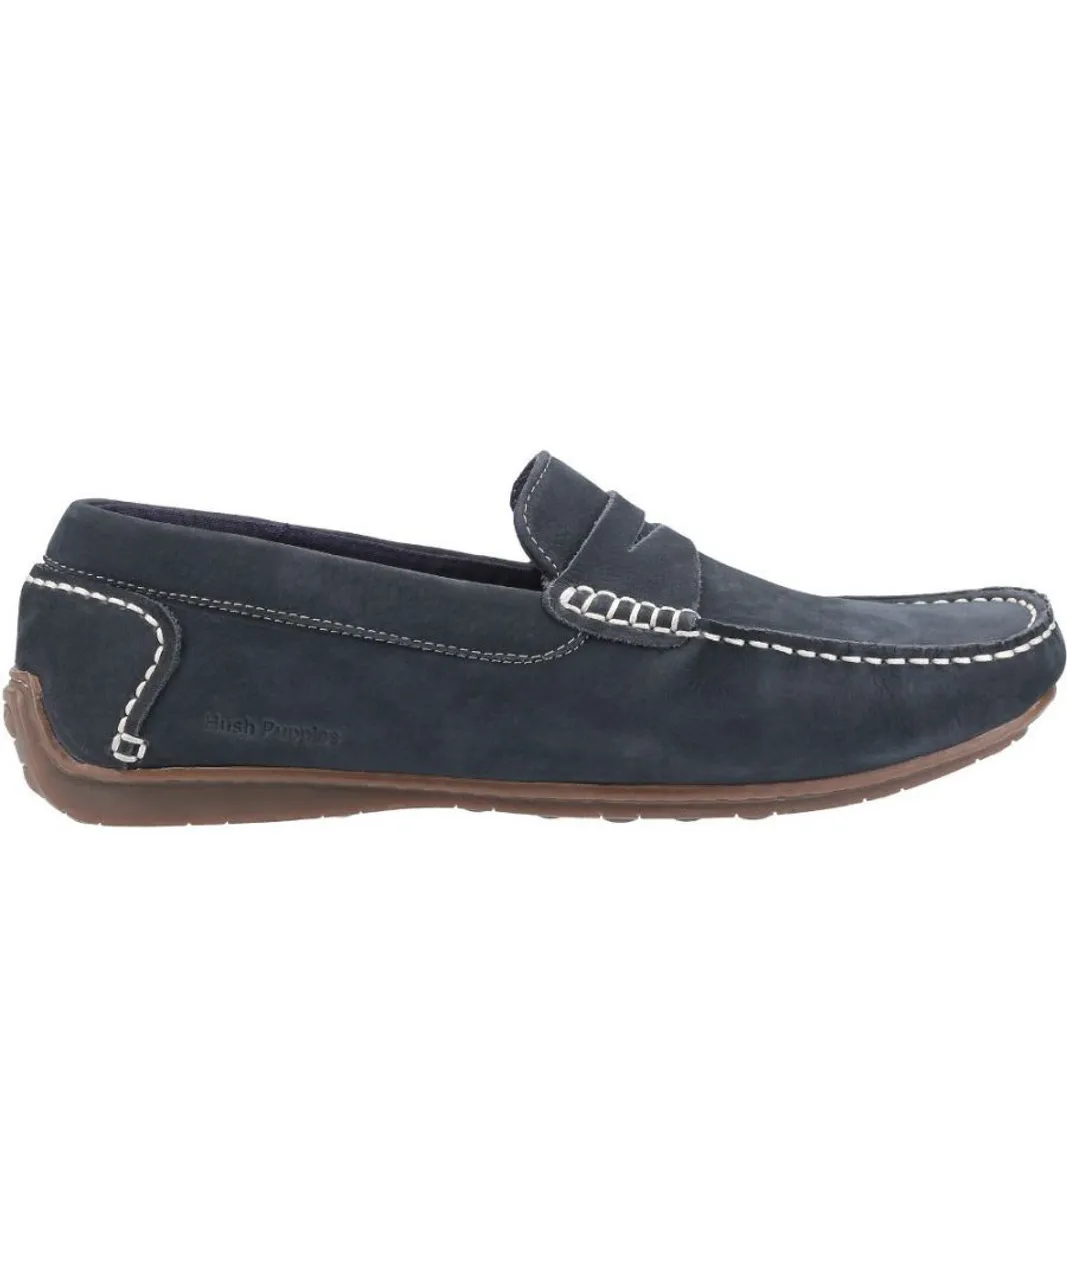 Hush Puppies Mens Roscoe Leather Slip On Loafer Shoes - Navy Nubuck Leather